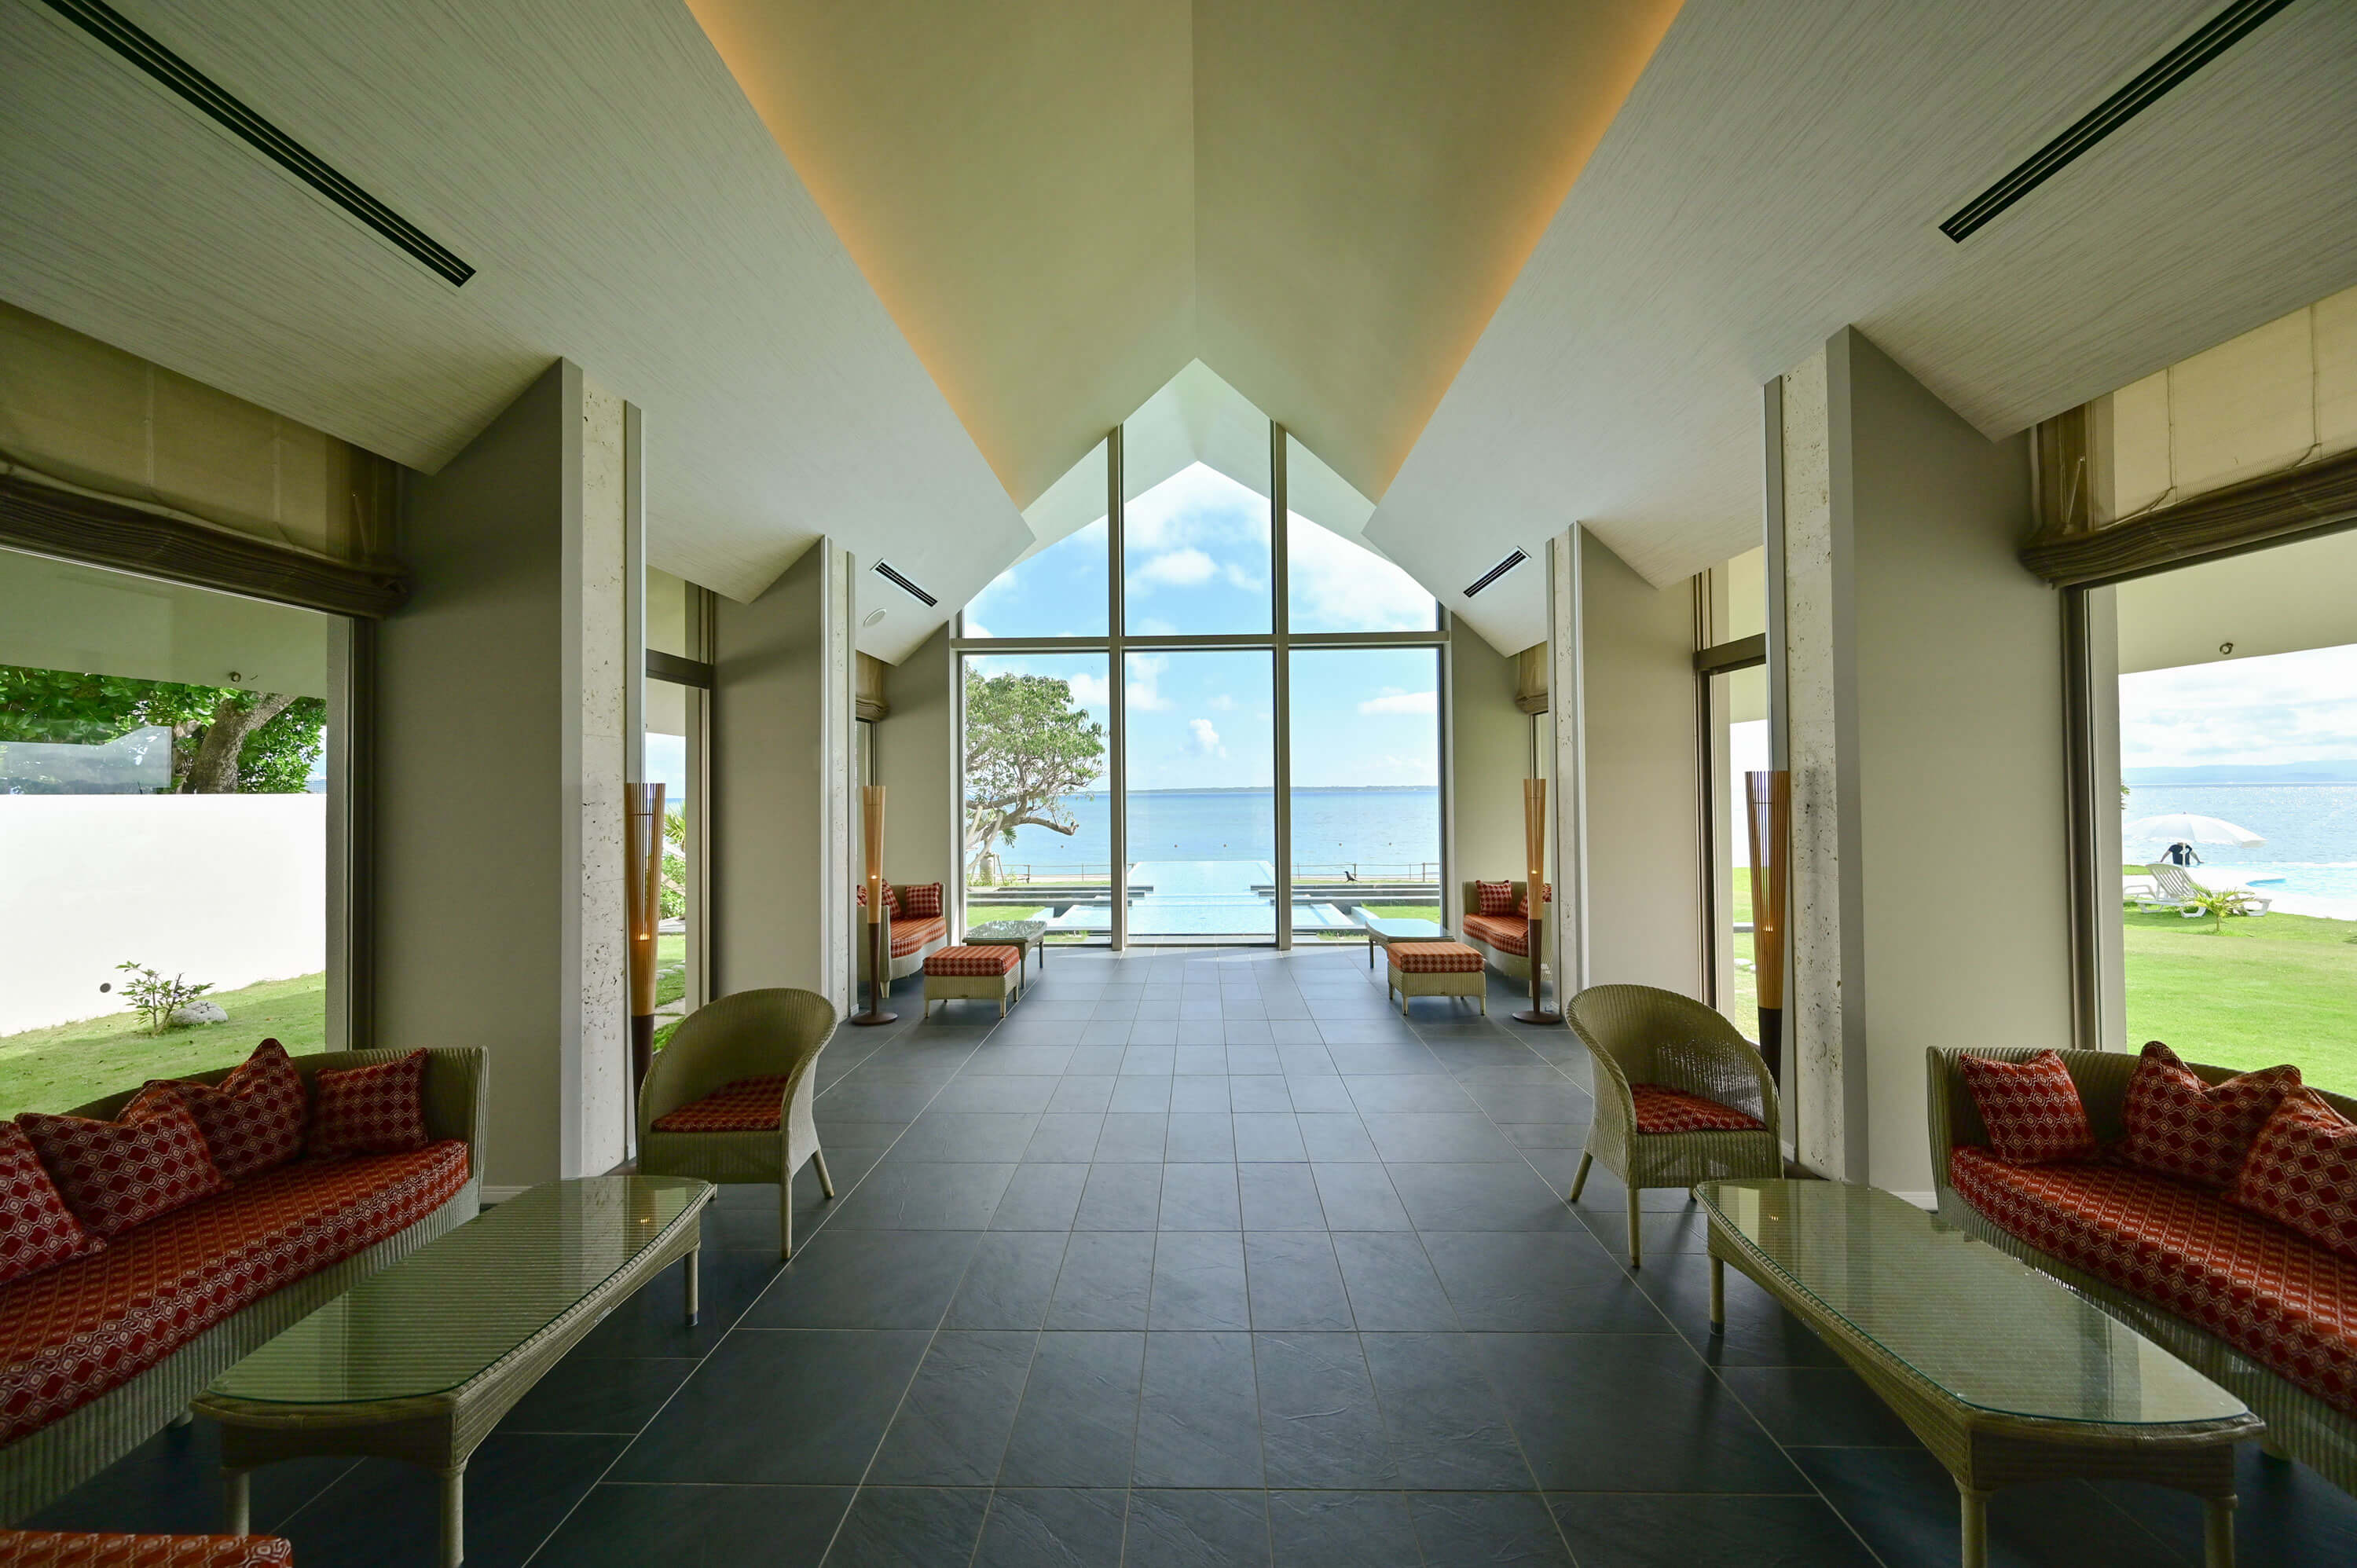 The New Wing reception is equipped with comfortable sofas for ultimate relaxation while gazing at the outside scenery.